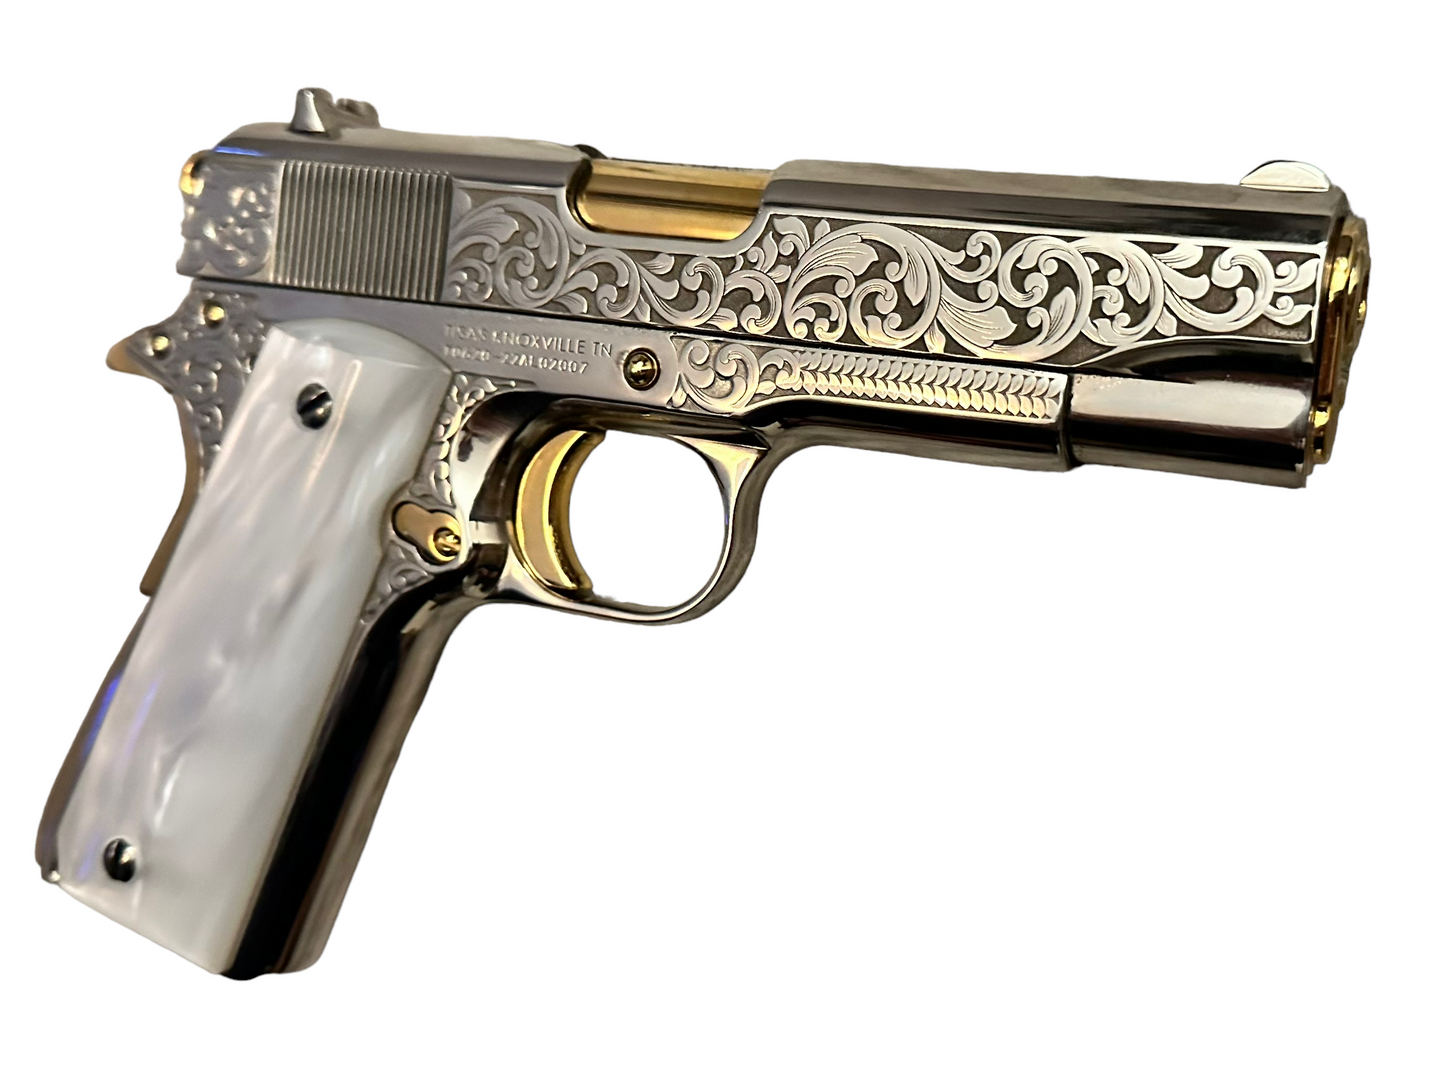 TISAS TANK COMMANDER 9mm 1911A1 TC 9 FULLY ENGRAVED, HIGH POLISHED, NICKEL & 24K GOLD PLATED